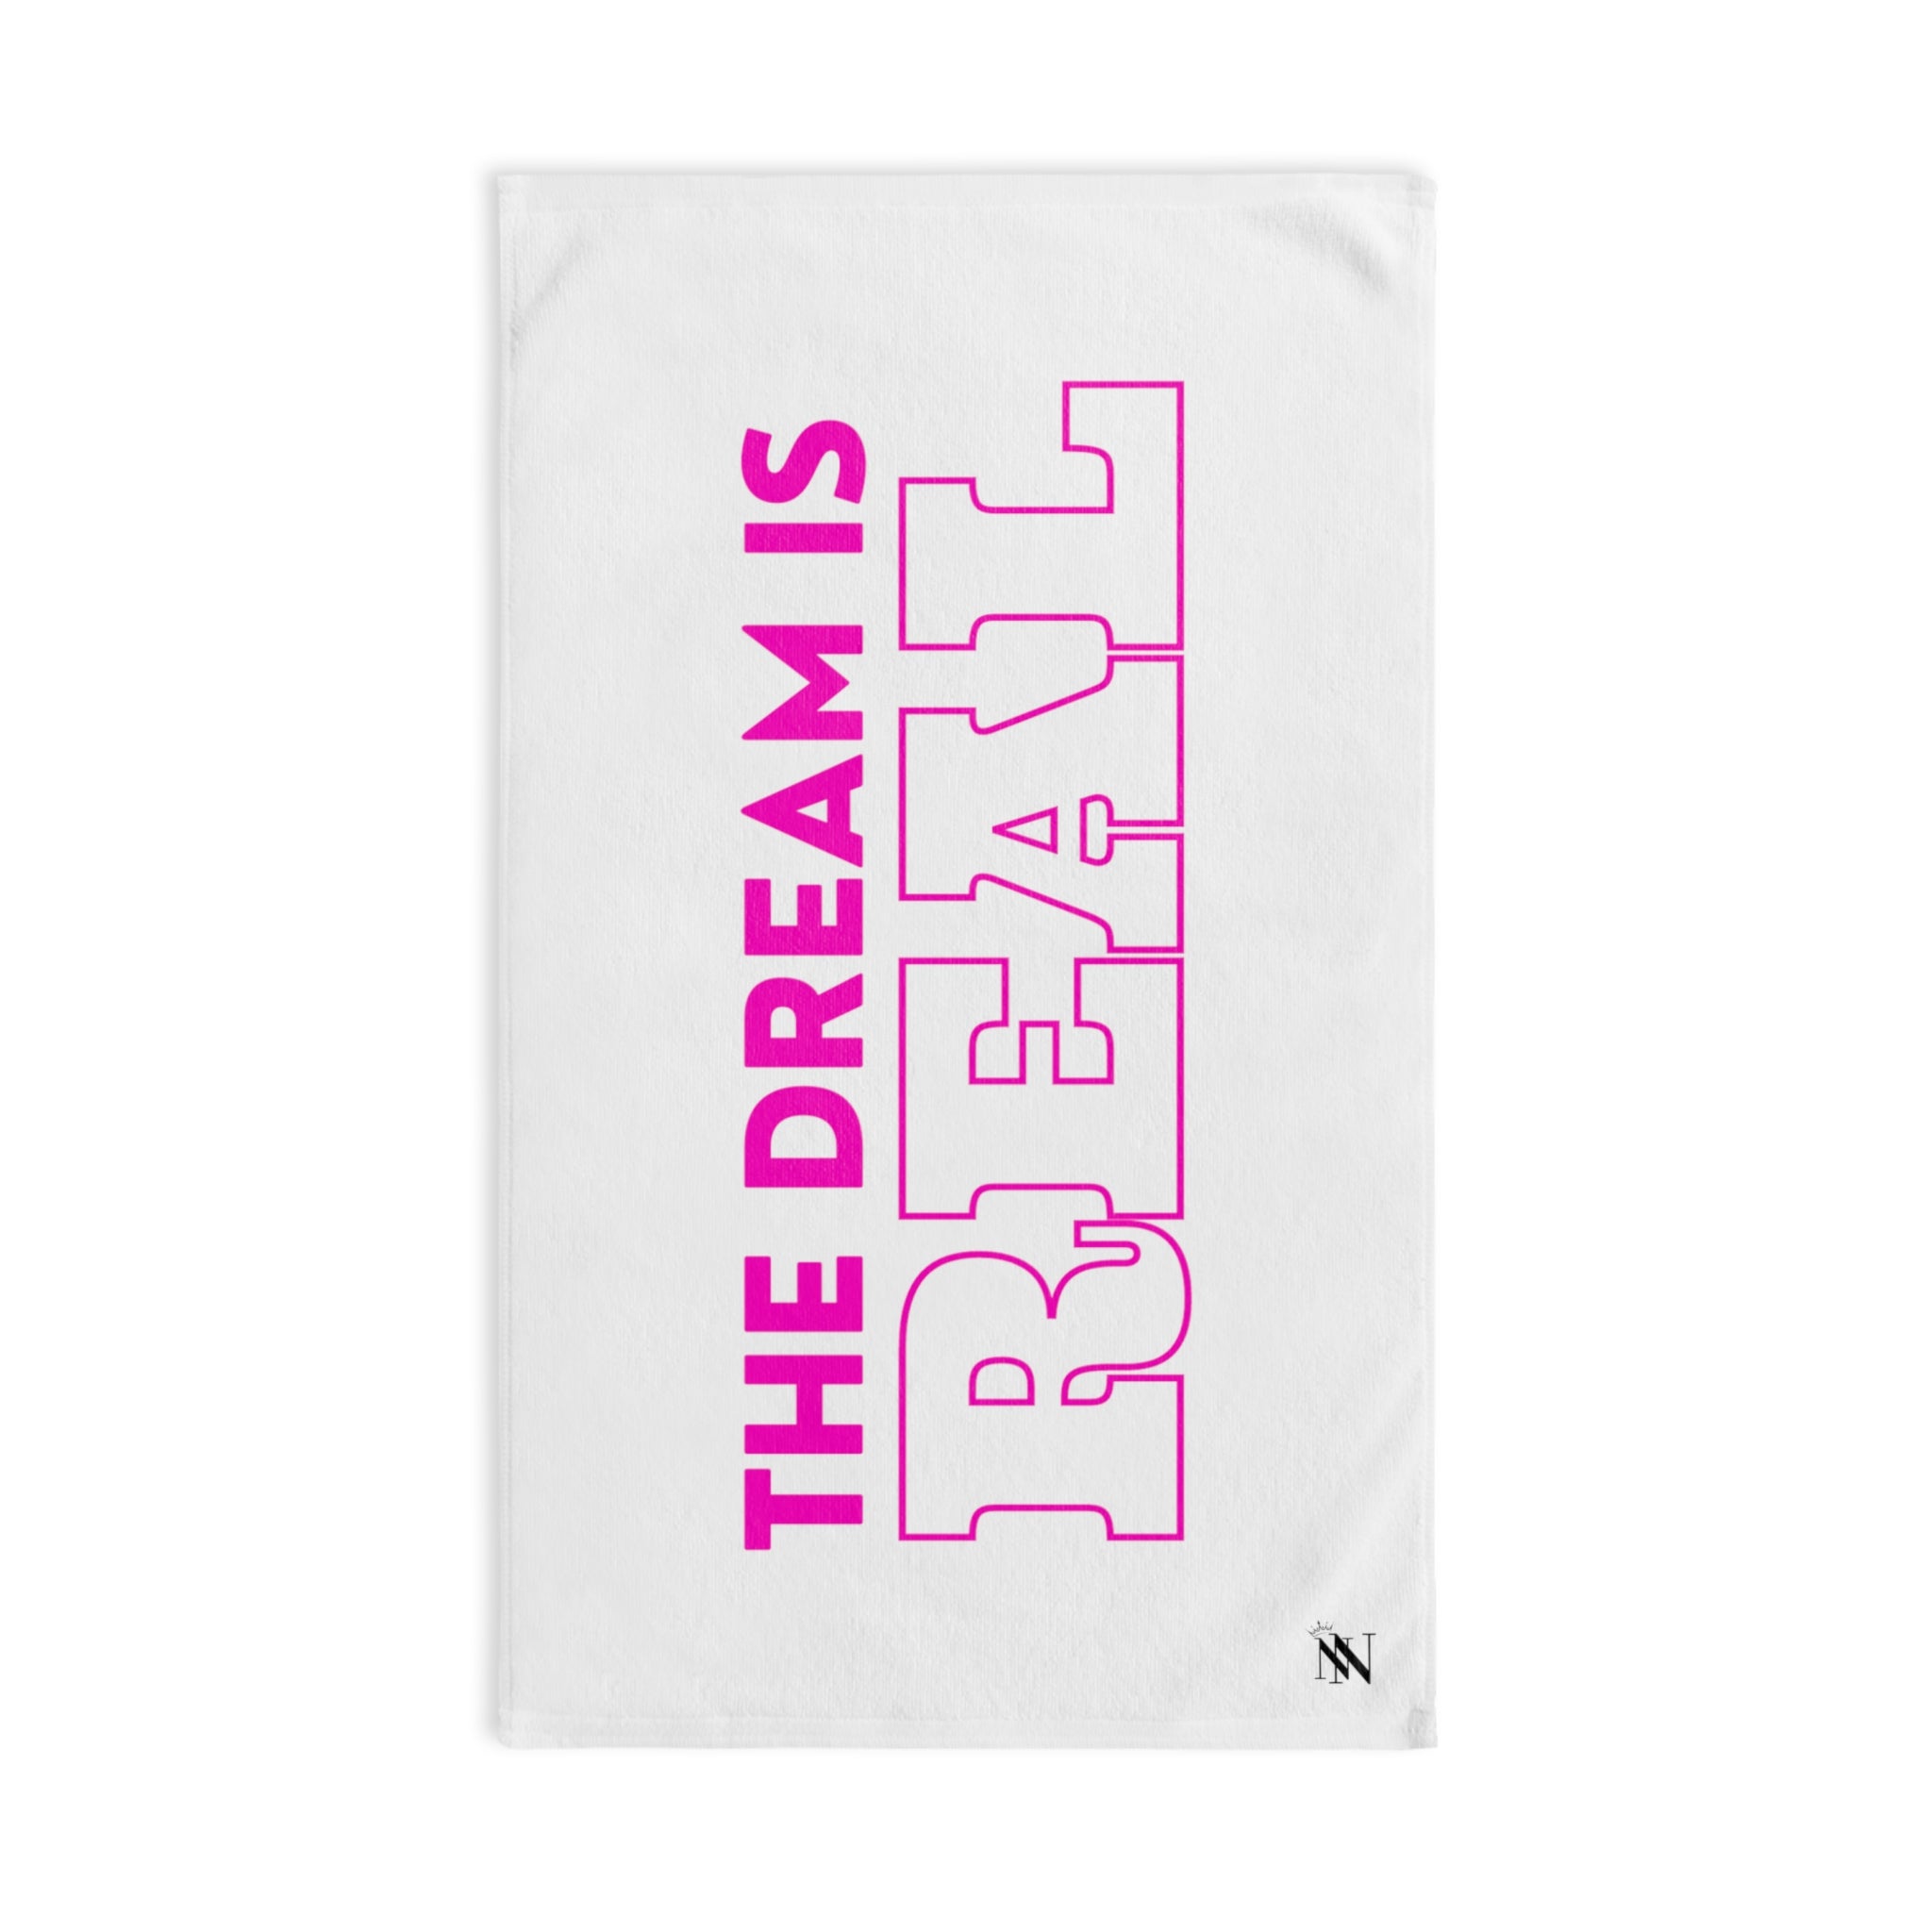 Dream Big Pink White | Funny Gifts for Men - Gifts for Him - Birthday Gifts for Men, Him, Her, Husband, Boyfriend, Girlfriend, New Couple Gifts, Fathers & Valentines Day Gifts, Christmas Gifts NECTAR NAPKINS